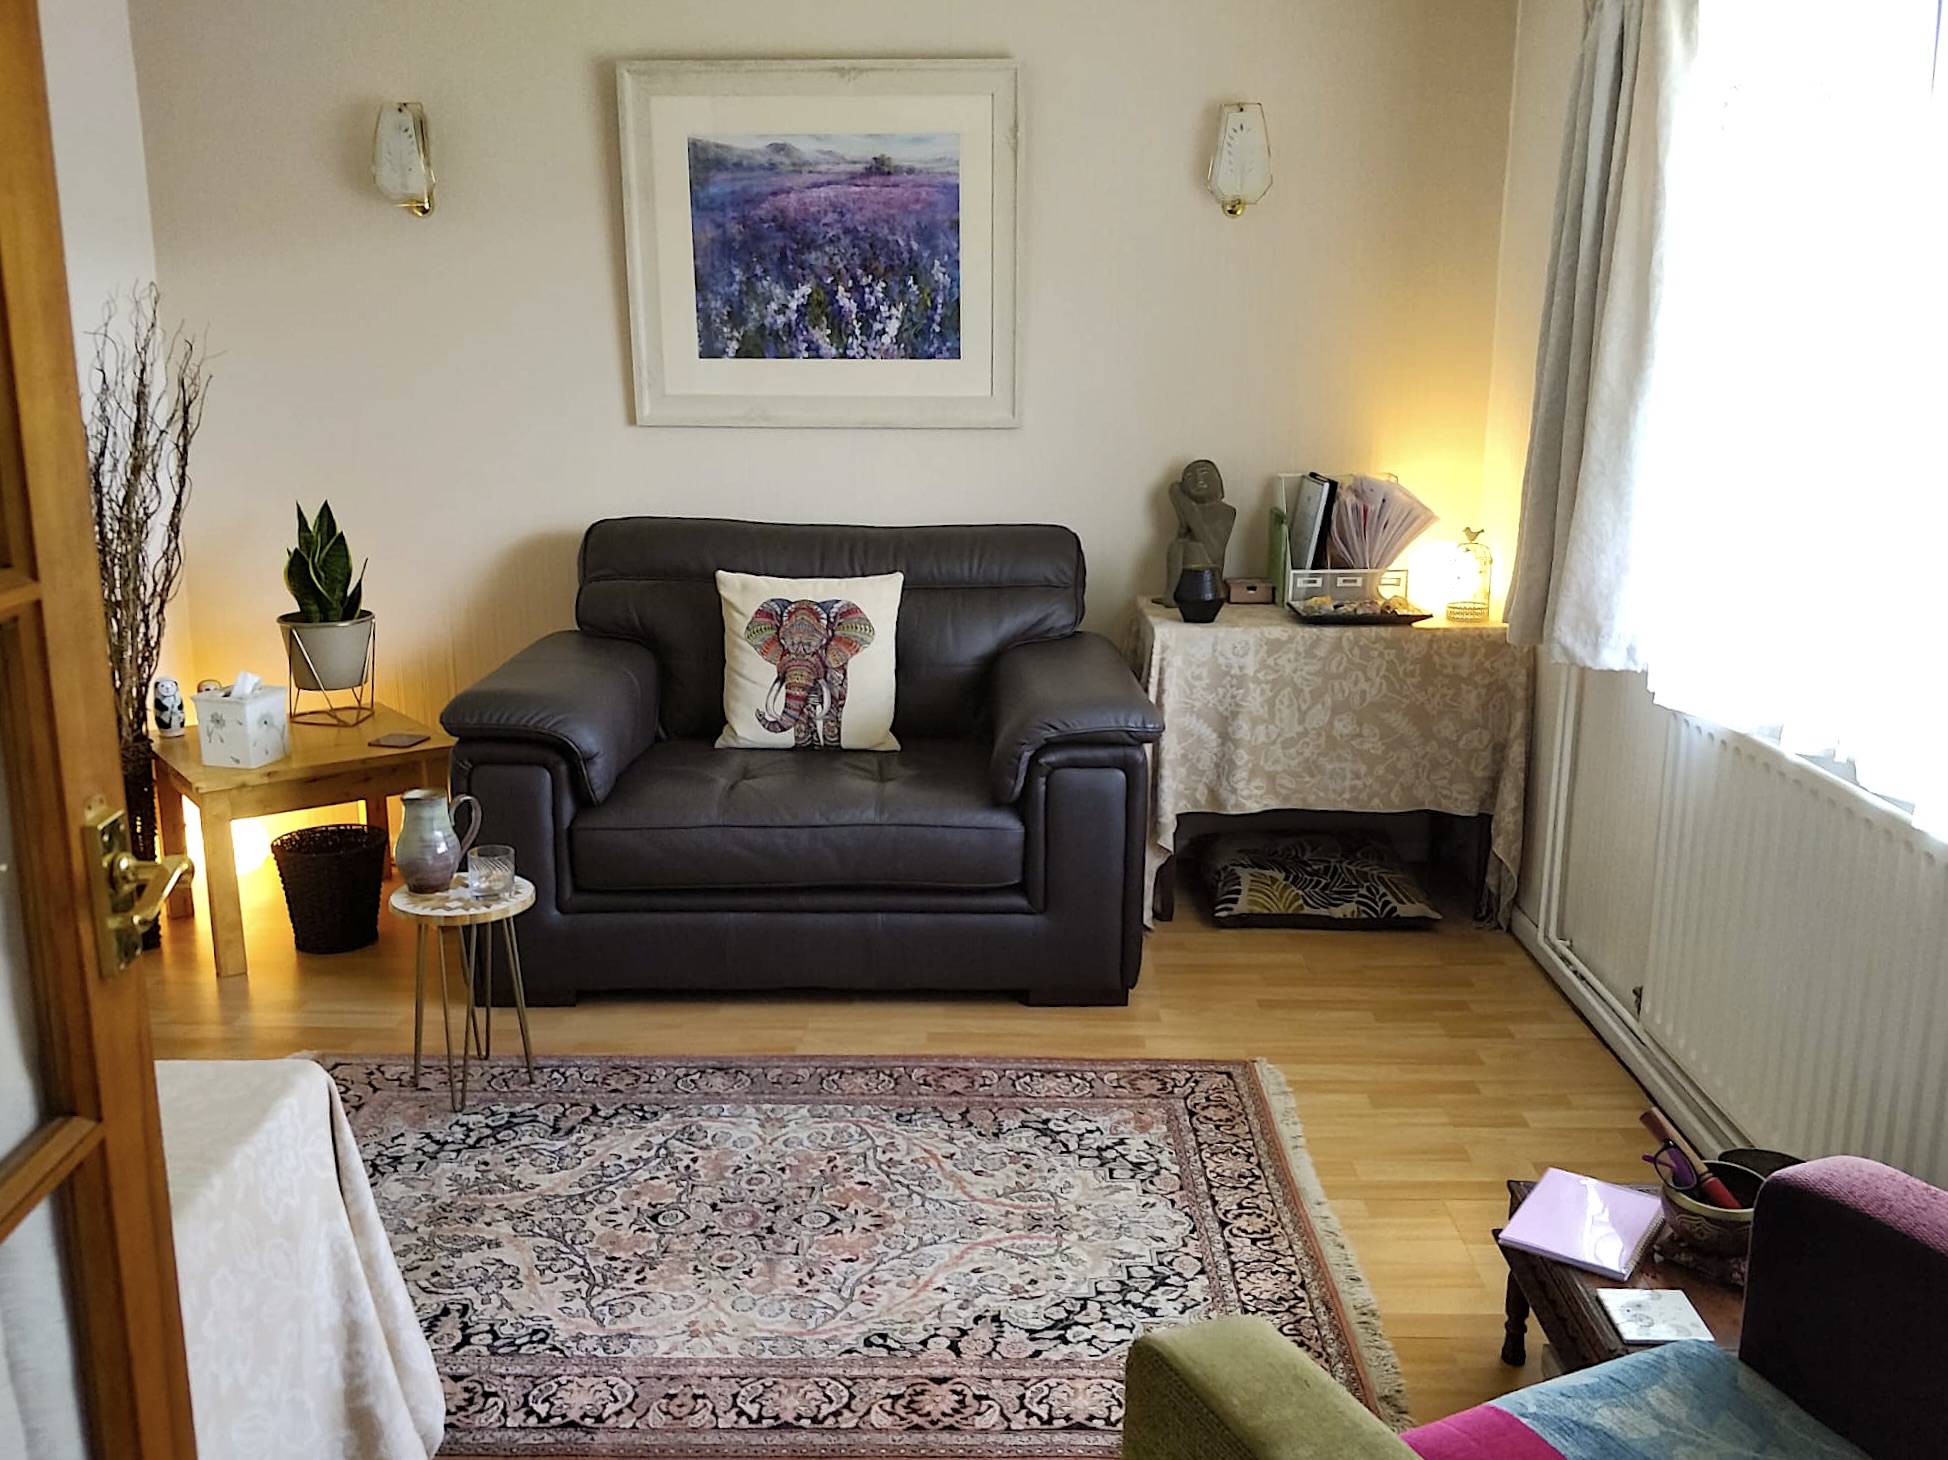 Picture of Jeanette's counselling room